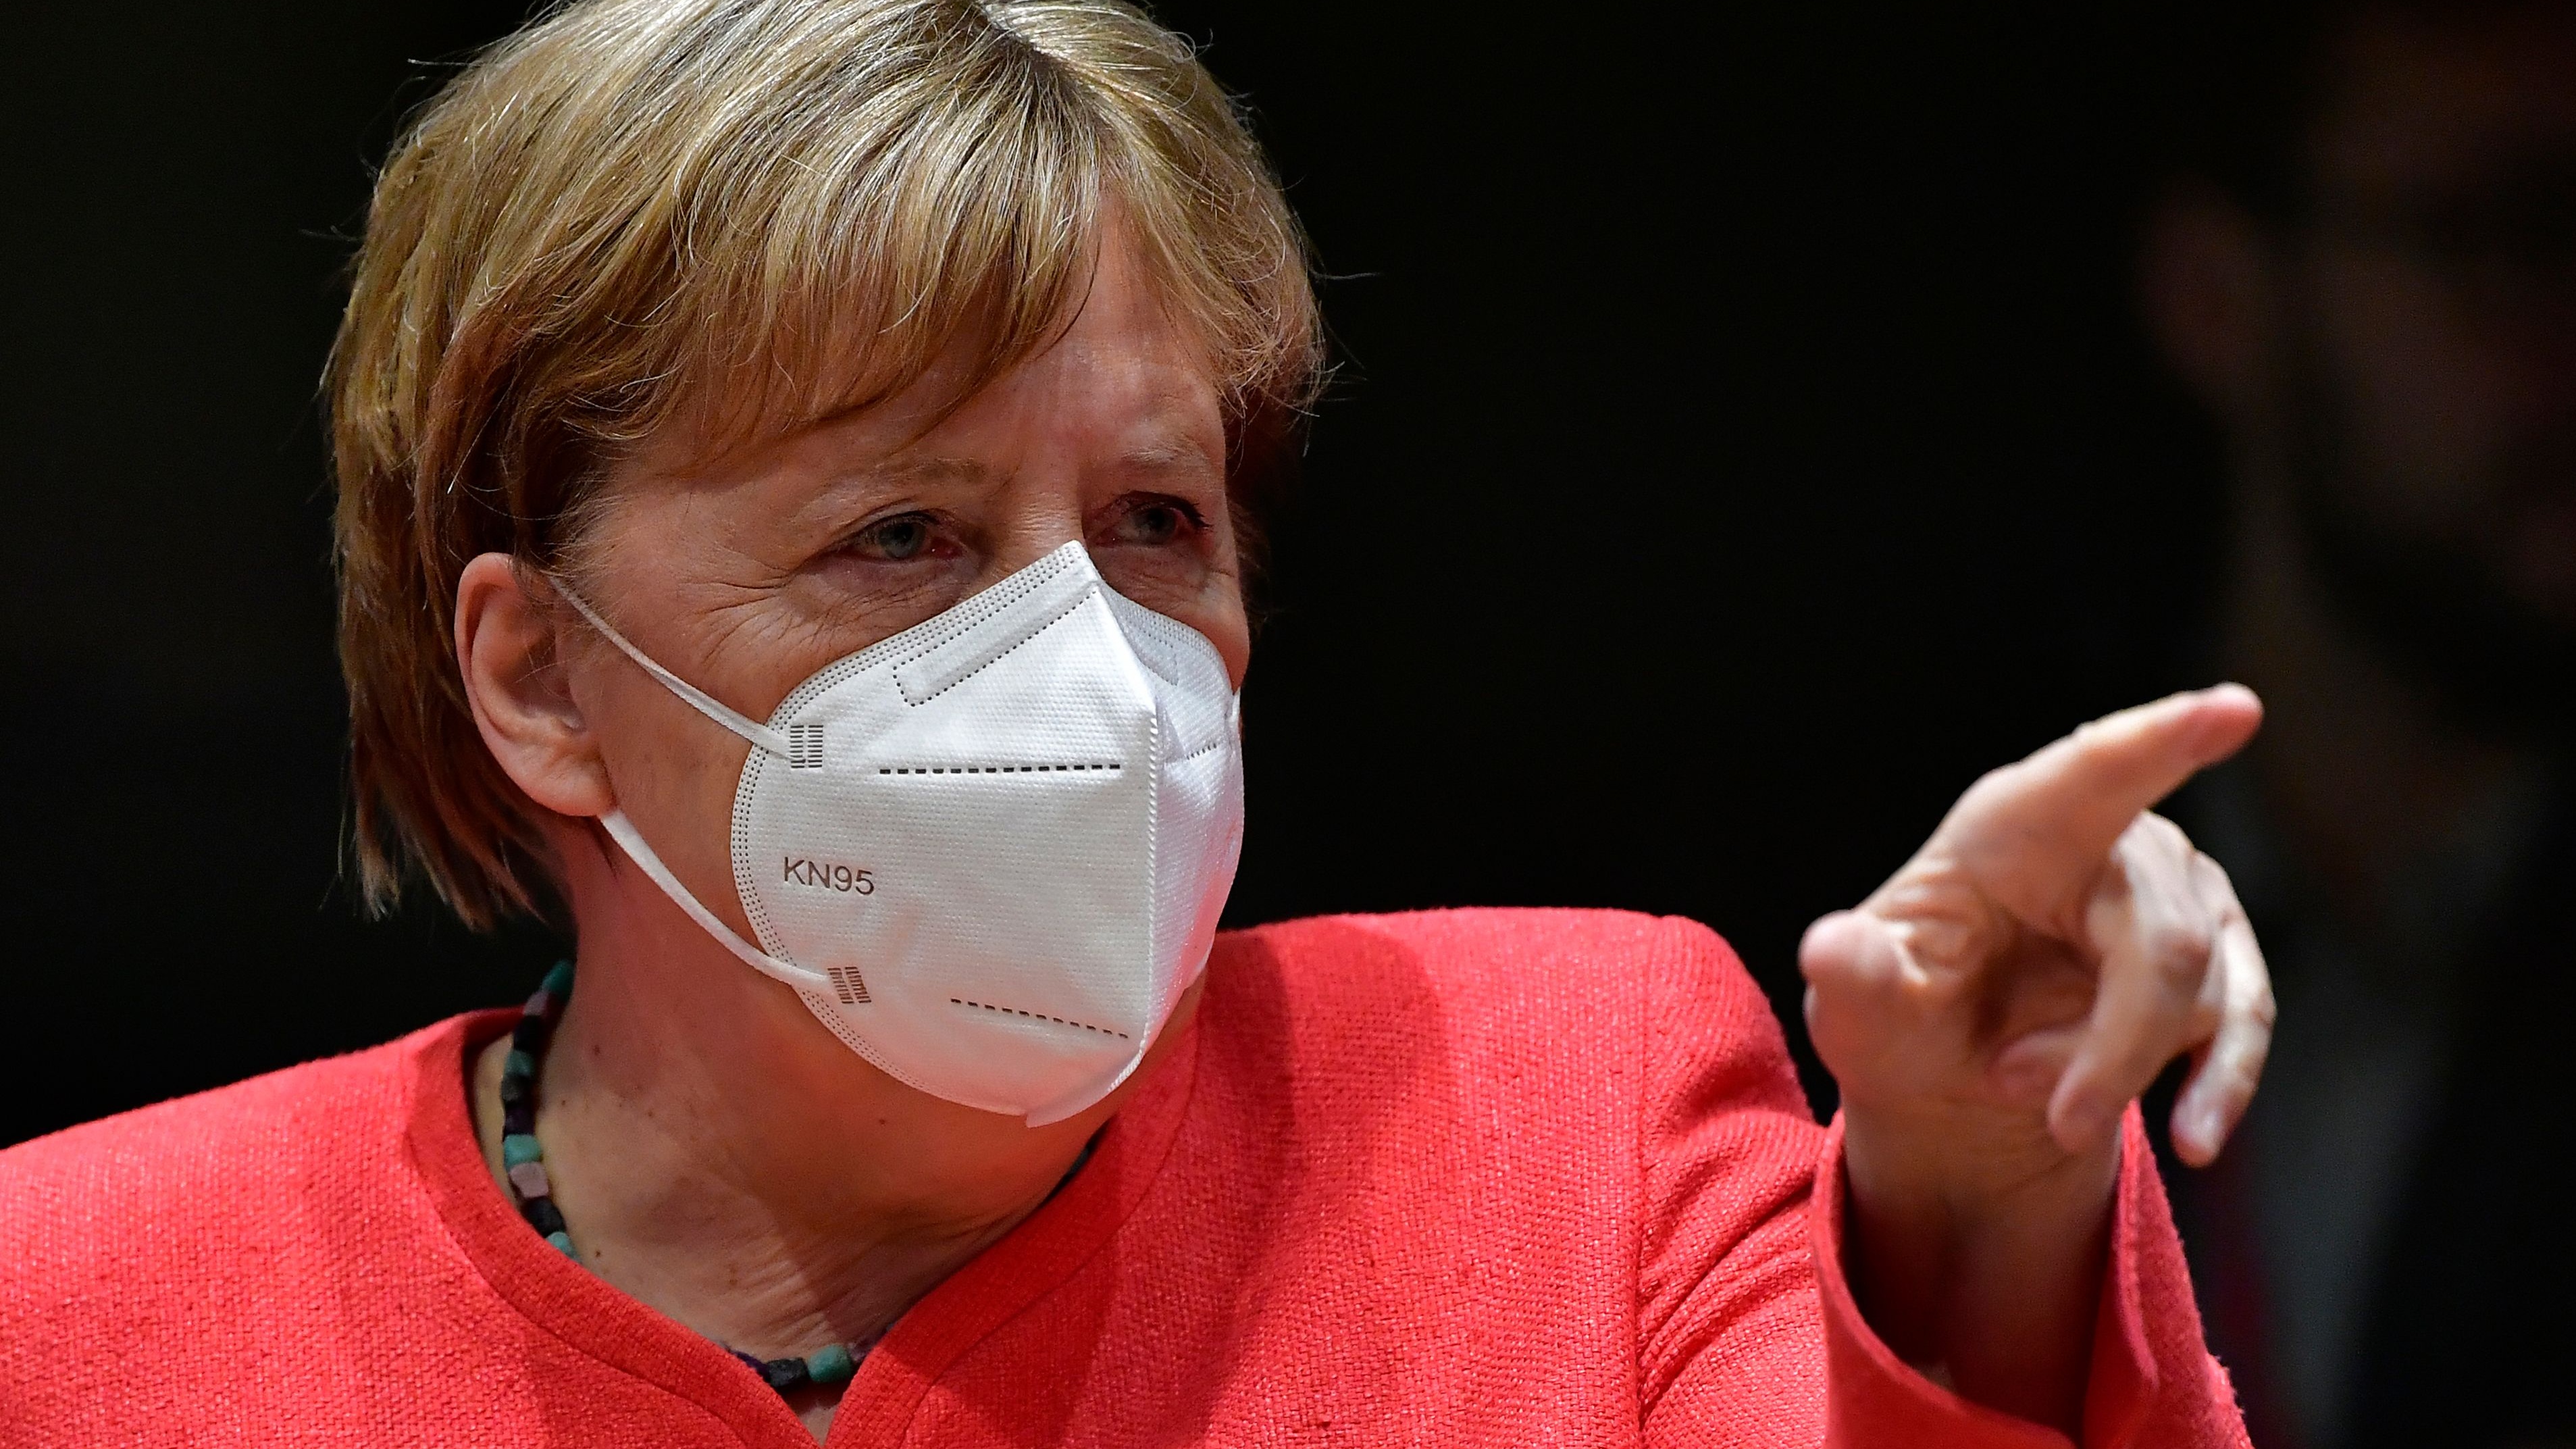 Angela Merkel pictured wearing a white face mask.